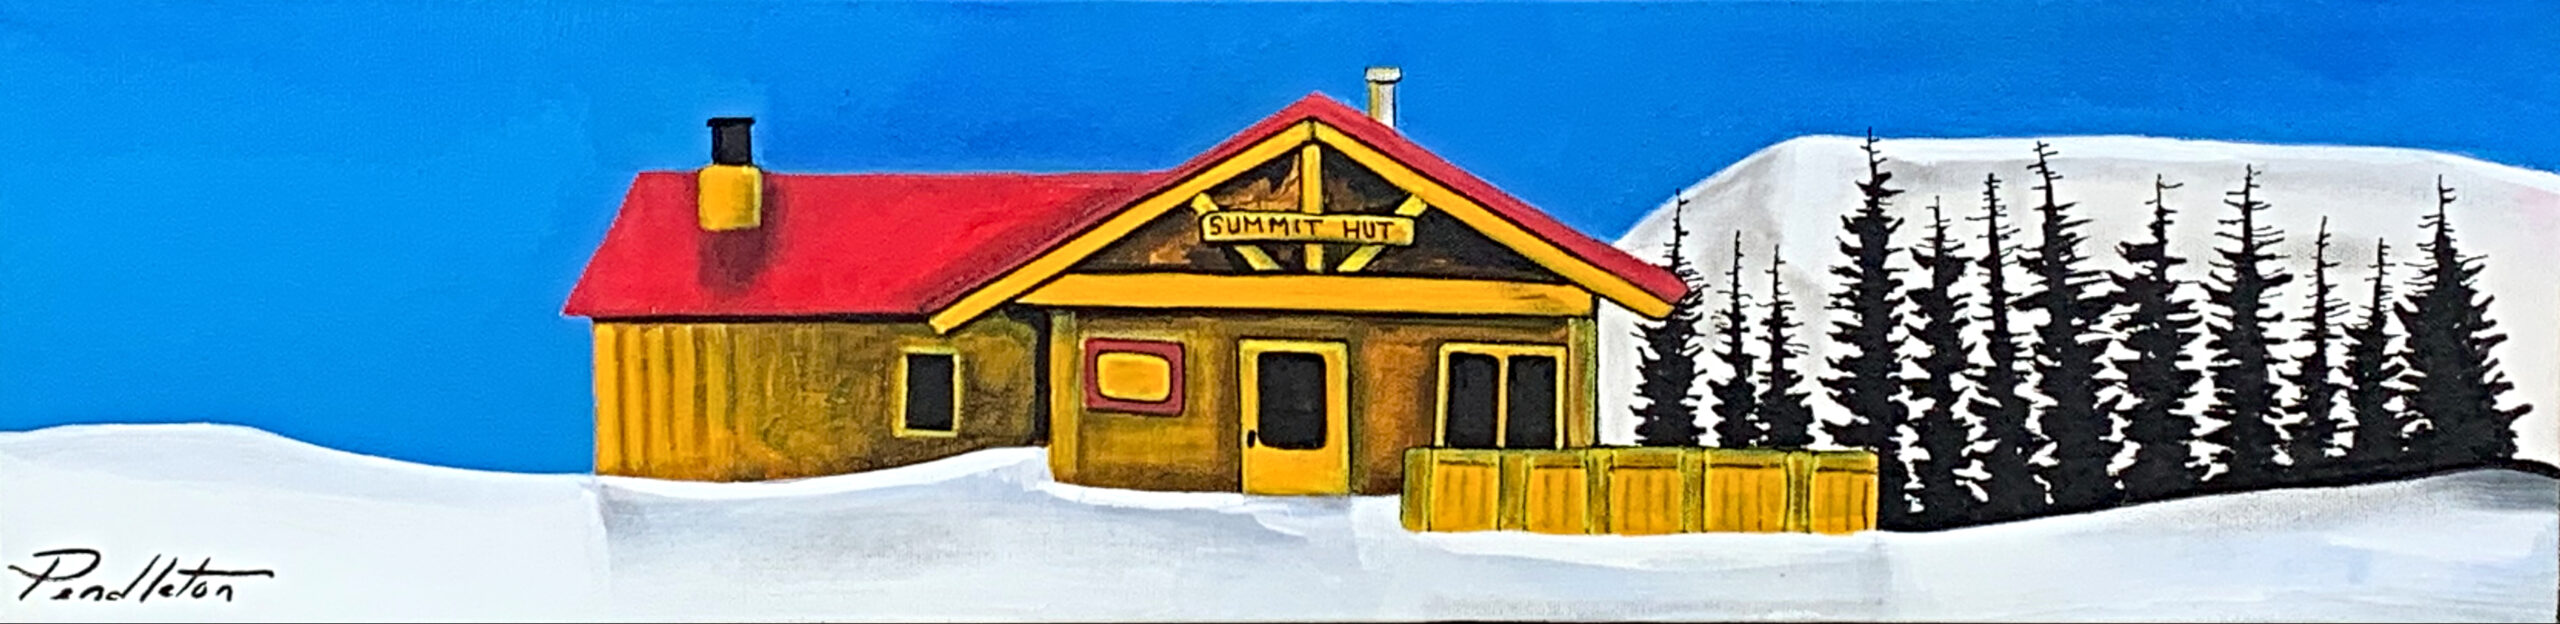 From the Hill, Mixed media landscape of the Summit Hut at Panorama Ski Resort by Cody Pendleton | Effusion Art Gallery, Invermere, BC